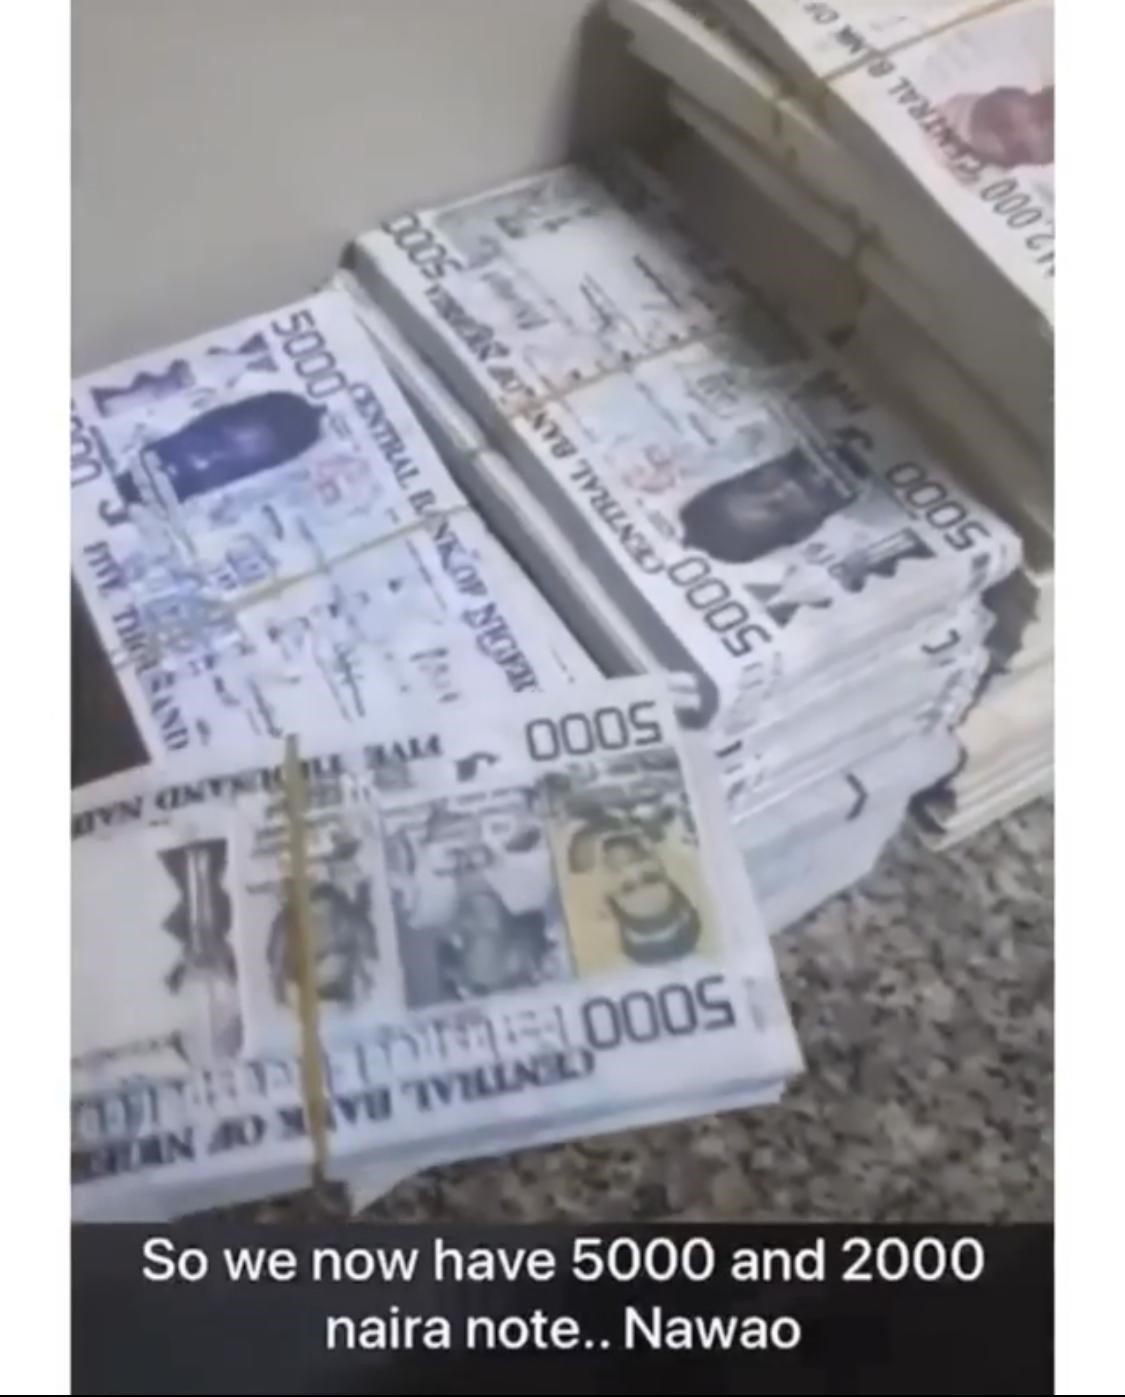 CBN Did Not Introduce 2,000, 5,000 Naira Notes As Claimed In This Video